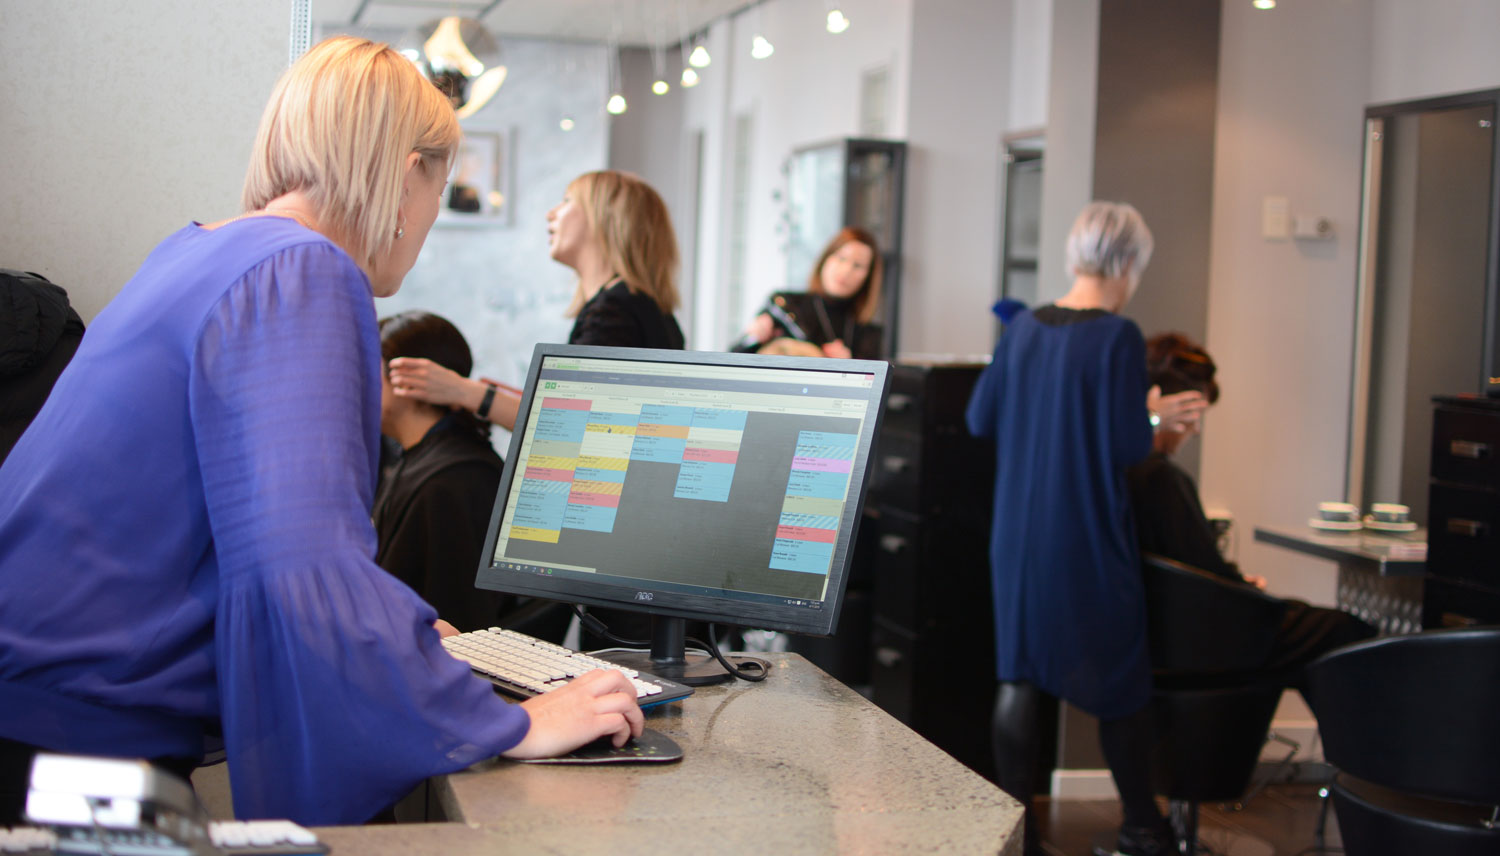 Staff using Timely salon software